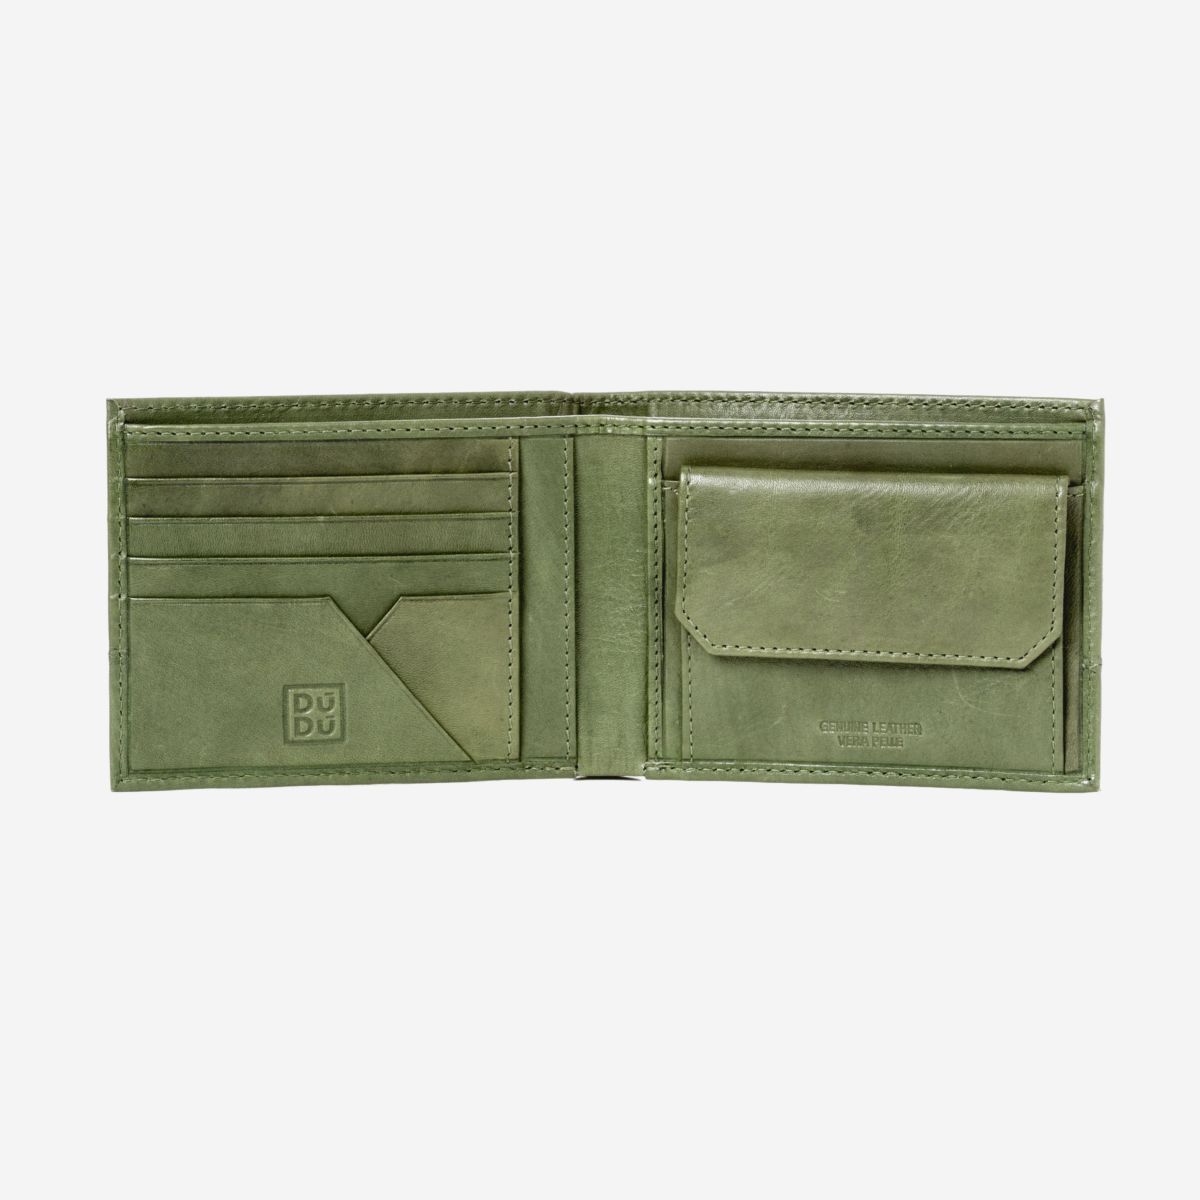 Men's Wallet with Coin Purse in Antiqued Vintage Leather Dudu